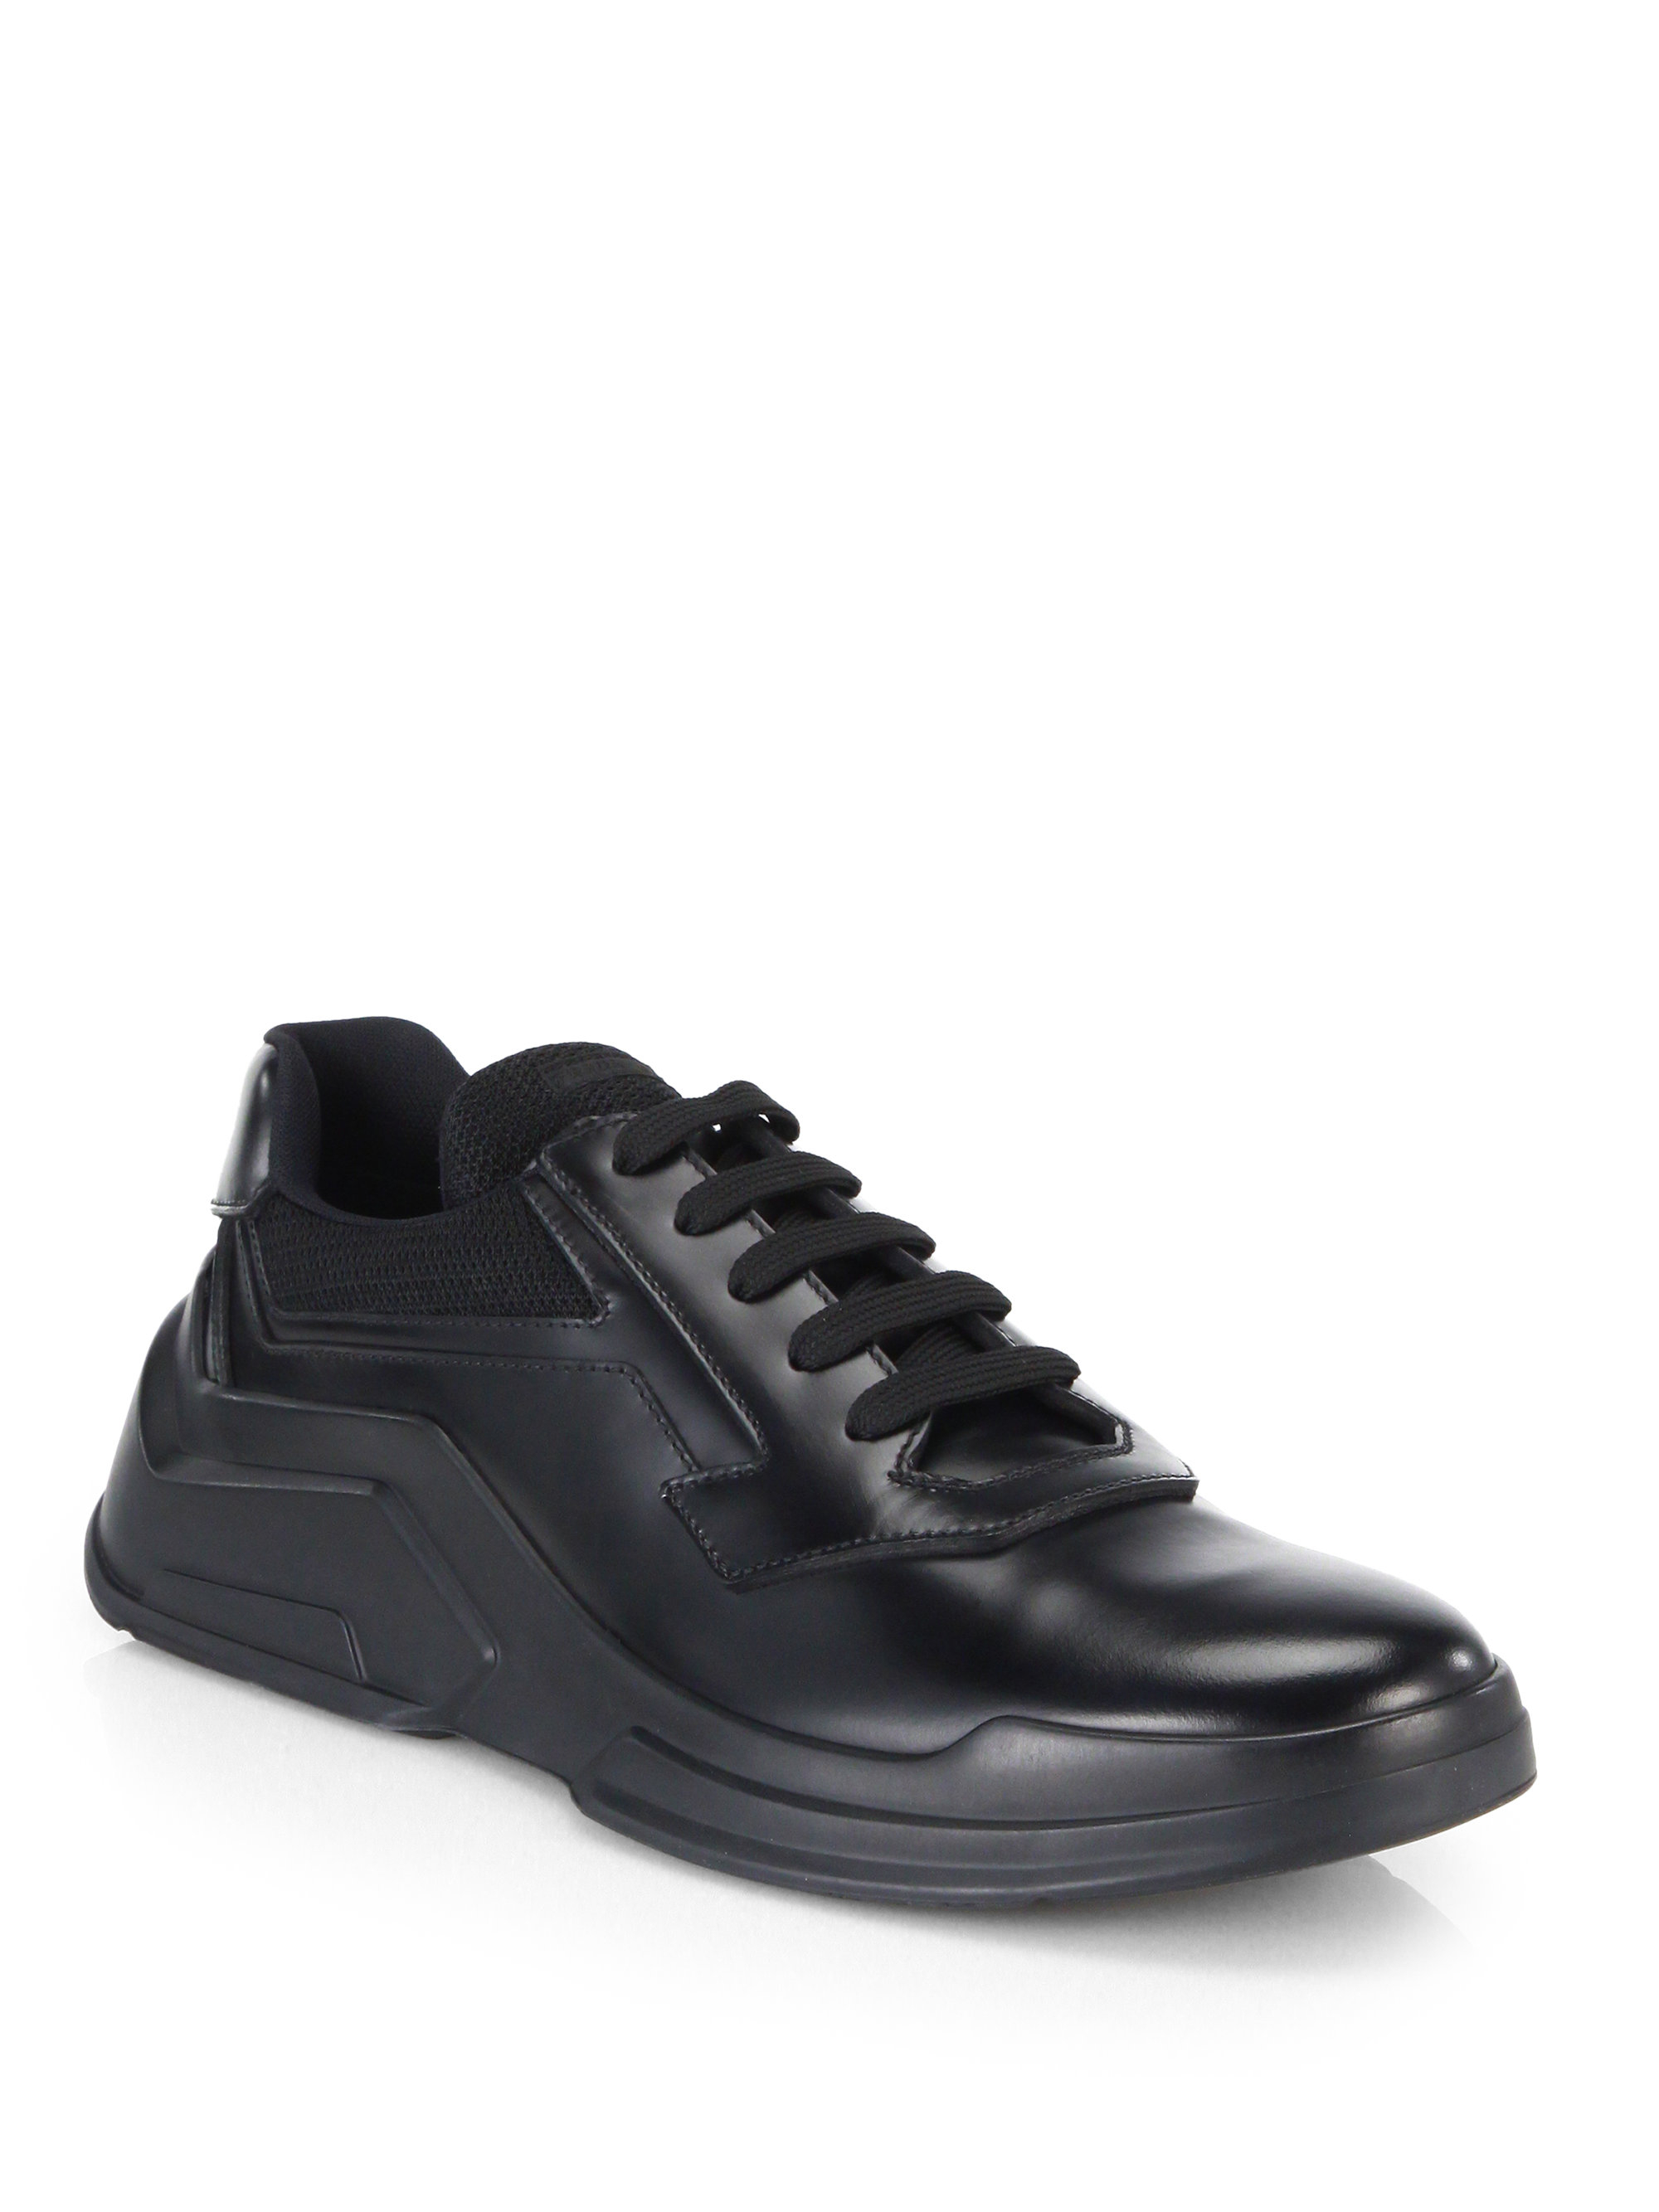 Prada Spazzolato Leather Laced Runway Sneakers in Black for Men - Lyst